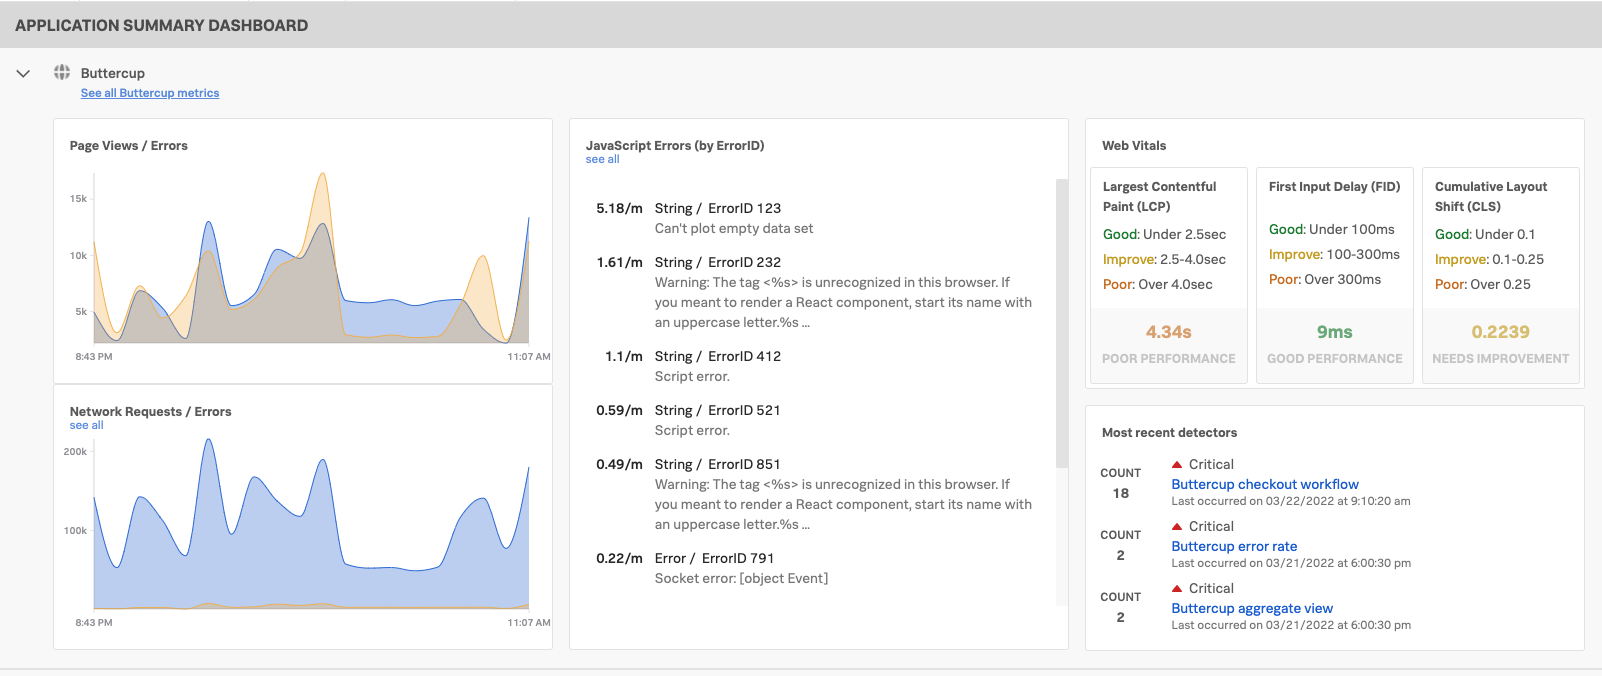 This image shows the application summary dashboard in Splunk RUM for Browser.